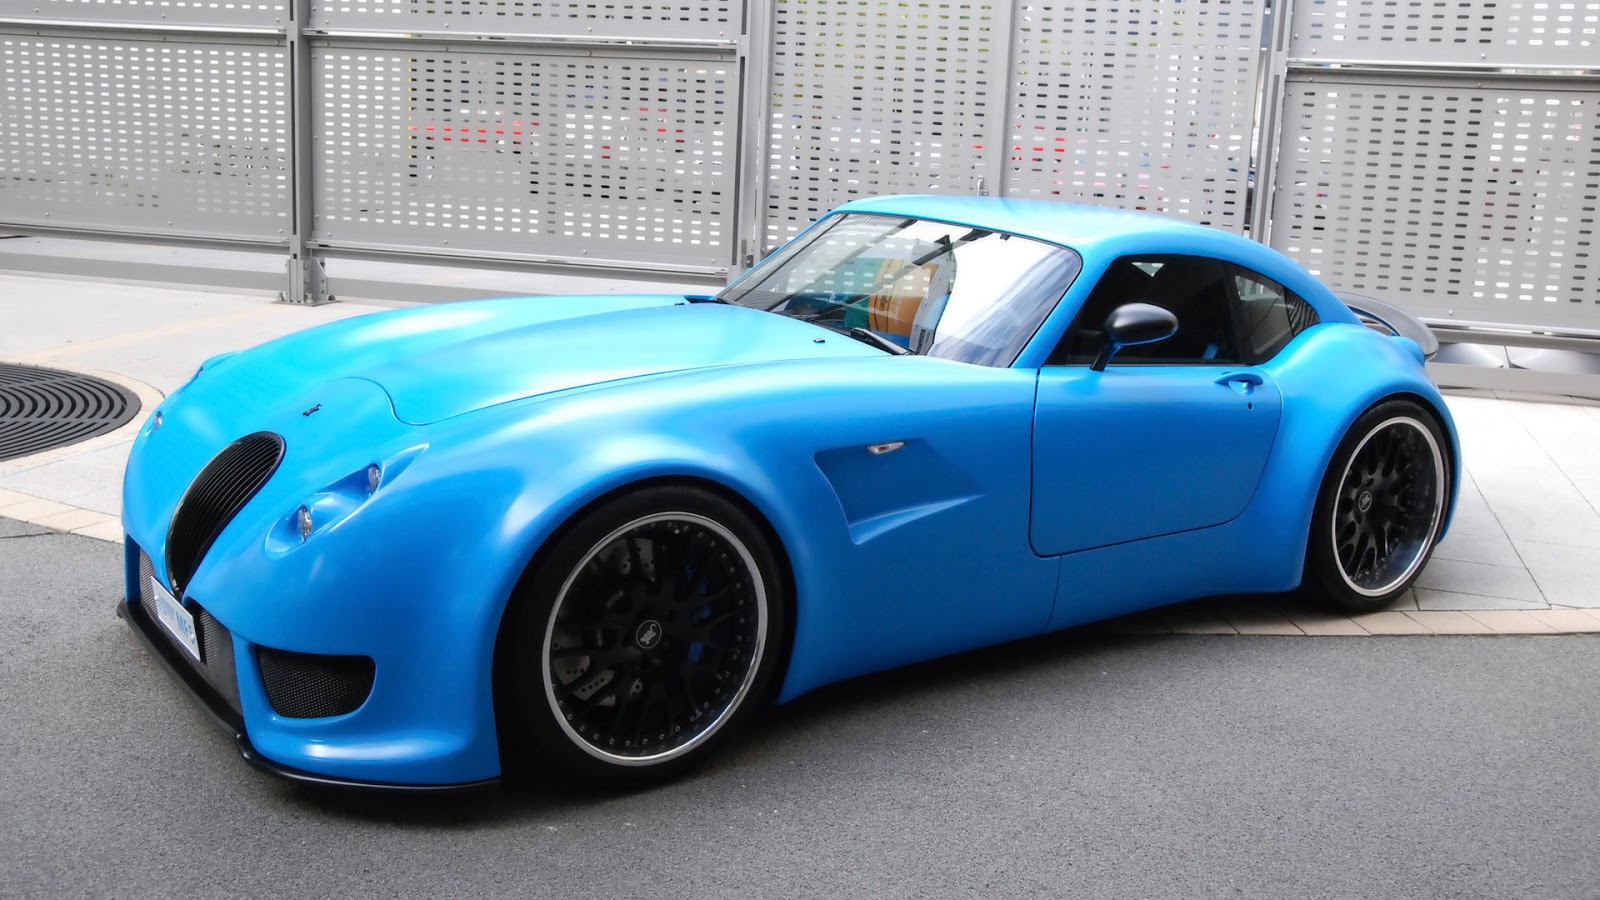 PixCars: Coolest Car Pictures and Images: Blue Sport Car